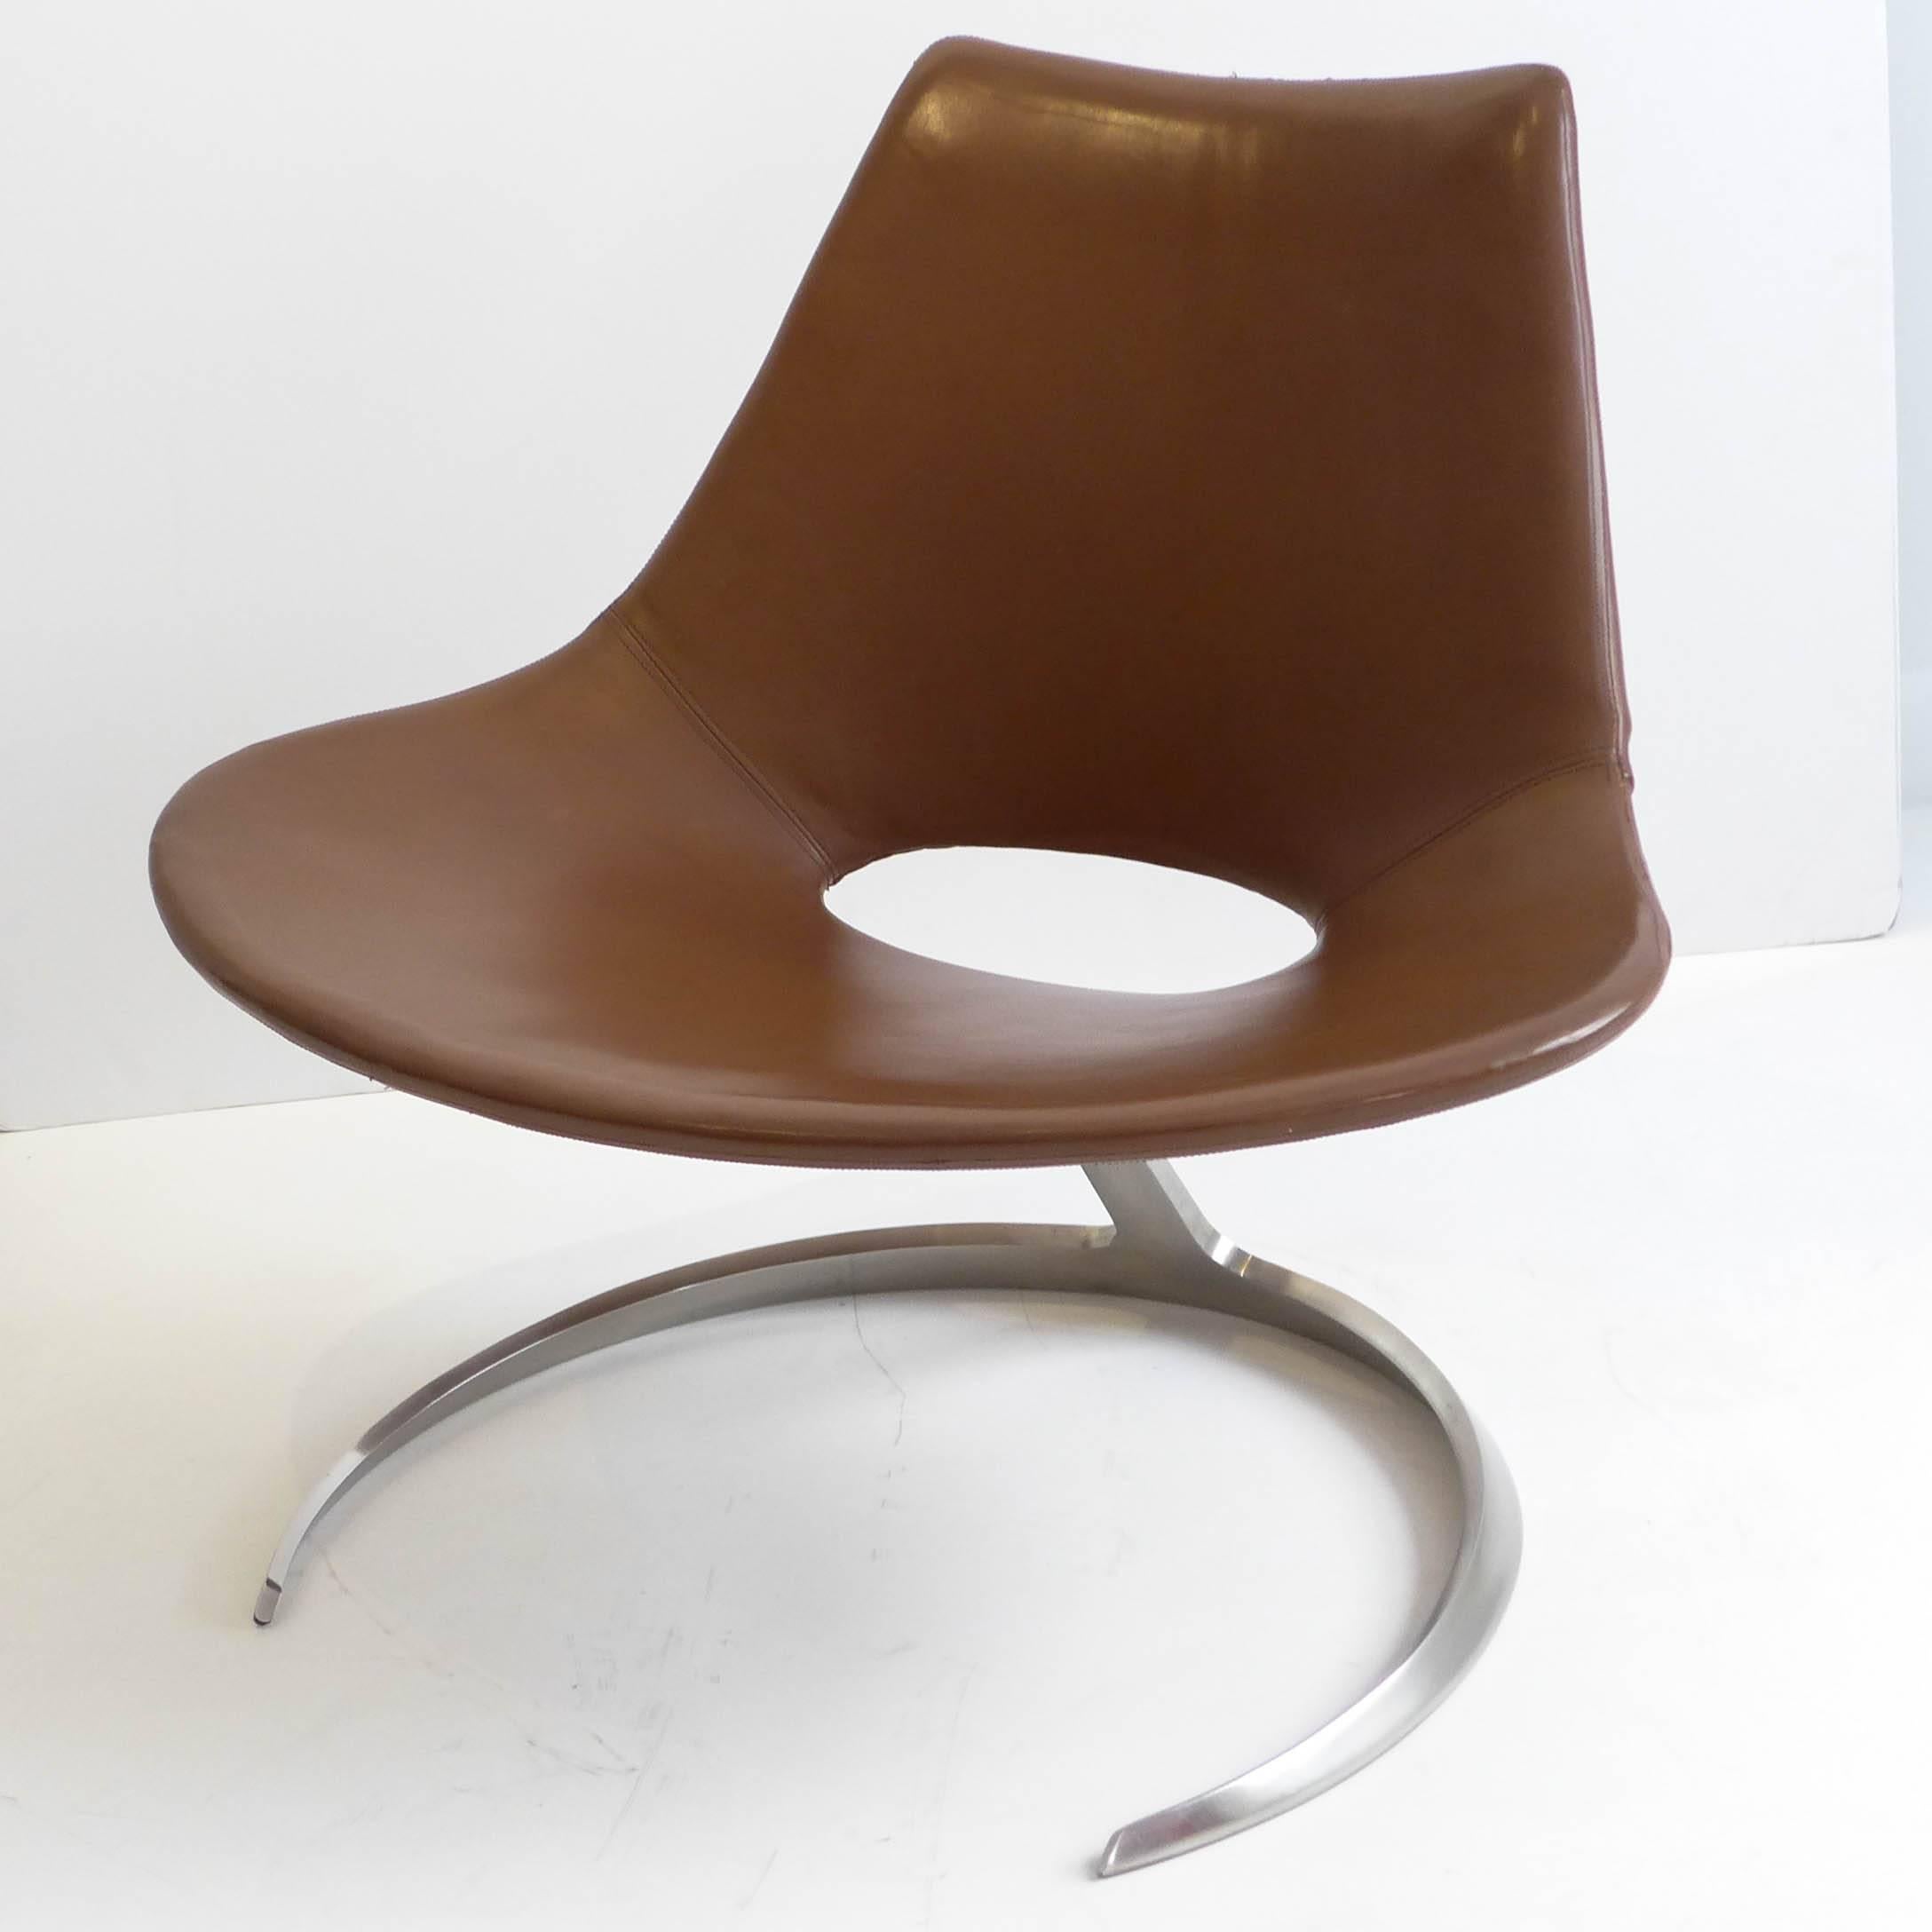 Early edition of the iconic Scimitar chair in stainless steel and leather by the Danish design team Preben Fabricius and Jorgen Kastholm. Produced by Ivan Schlechter, Copenhagen, circa 1960s. Embossed mark underneath.